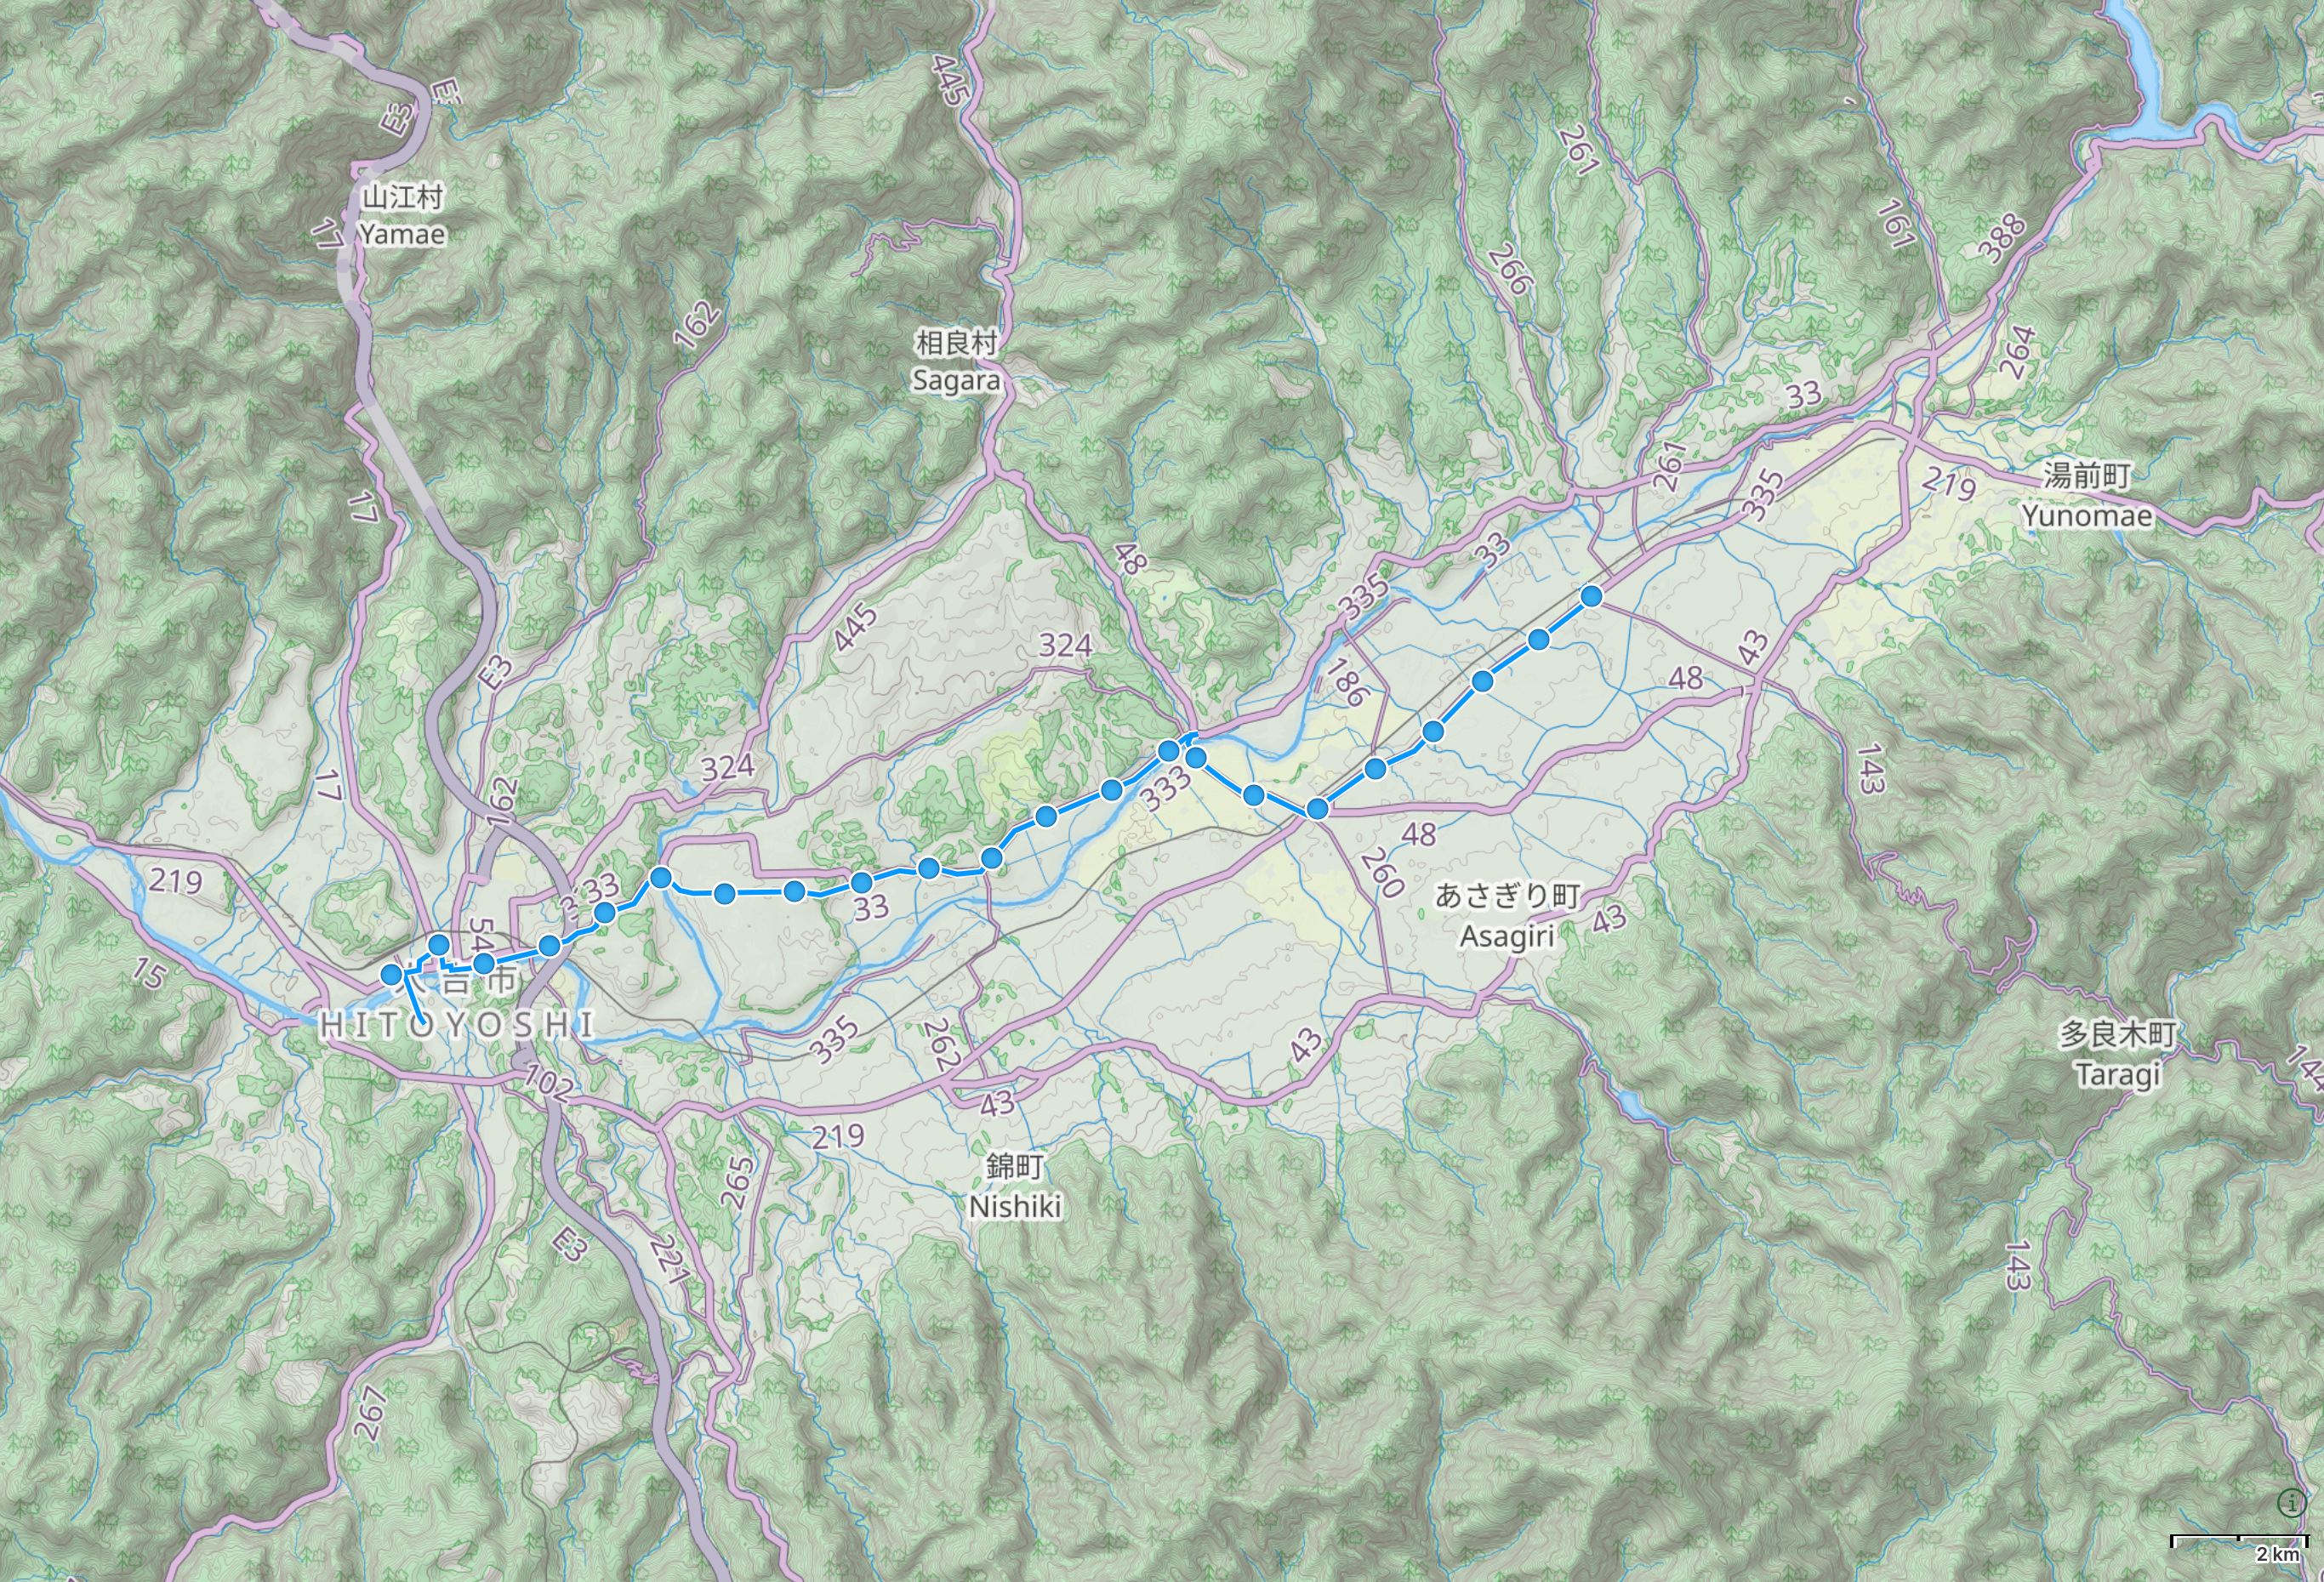 Map of Kyushu with the route of These Walking Dreams highlighted. Maps © Thunderforest, Data © OpenStreetMap